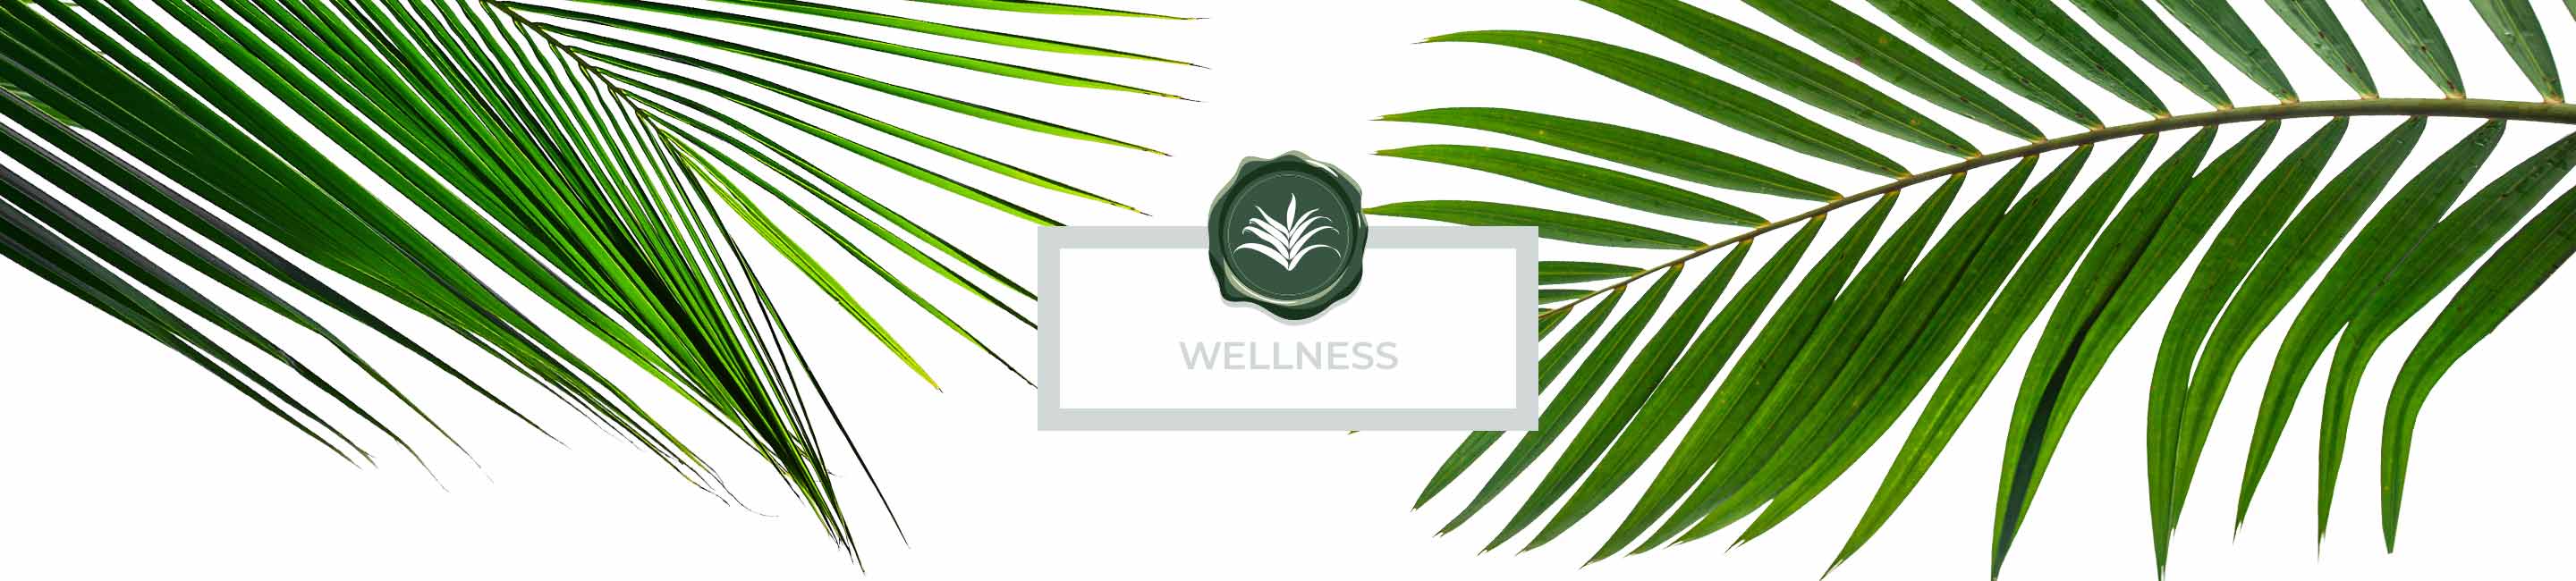 Wellness Conscious Beauty Seal with a palm background